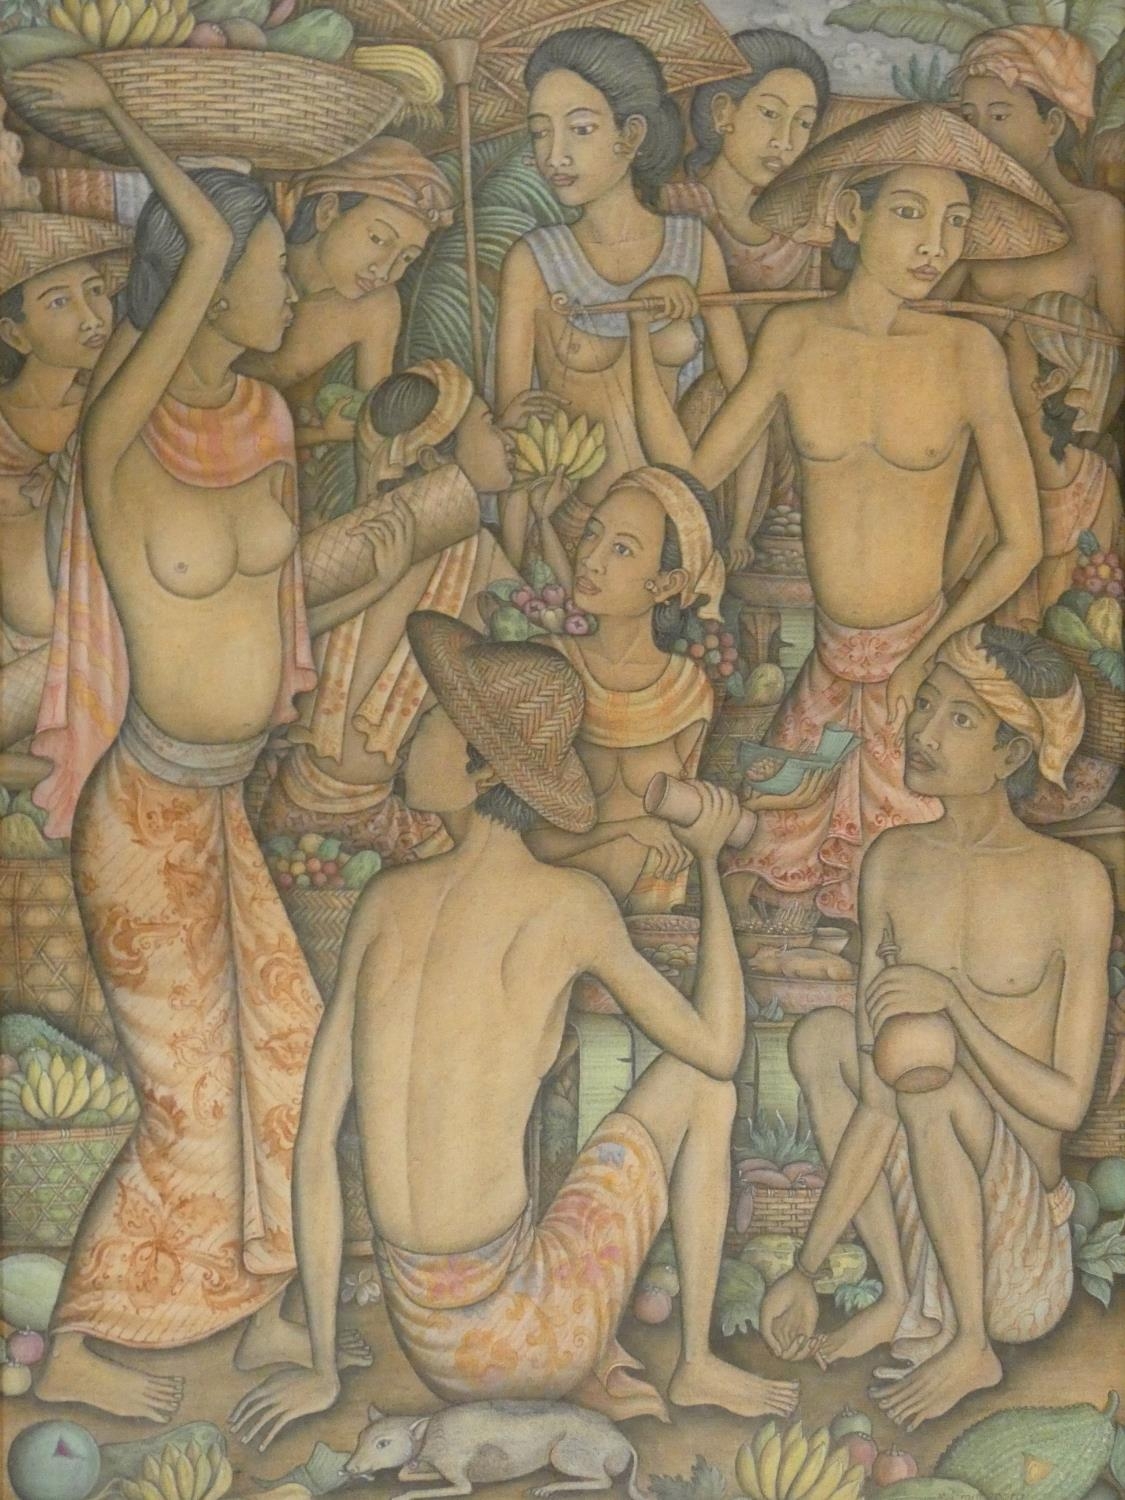 A framed acrylic on canvas attributed to Indonesian artist Made Suarsa, titled and dated 1997.